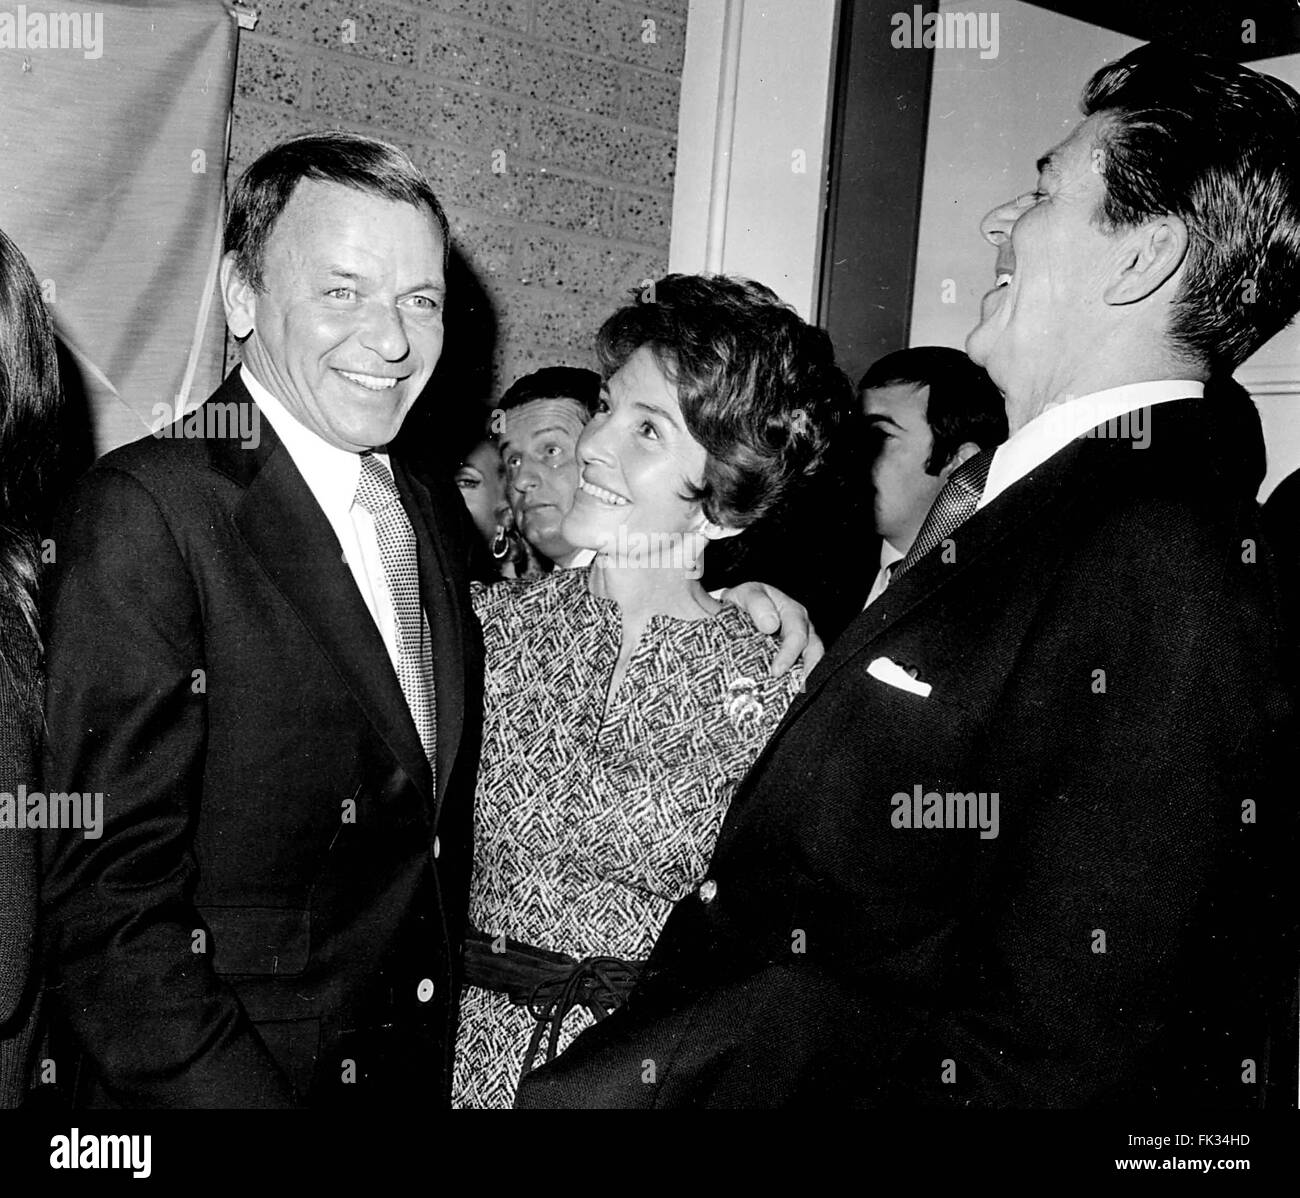 March 6, 2016 - NANCY REAGAN, Ronald Reagan's widow and First Lady from 1981-1989, has died at 94. The cause of death was congestive heart failure. Pictured: 1955 - Exact Date Unknown - FRANK SINATRA, RONALD REAGAN and wife NANCY REAGAN. (Credit Image: © Globe Photos/ZUMAPRESS.com) Stock Photo